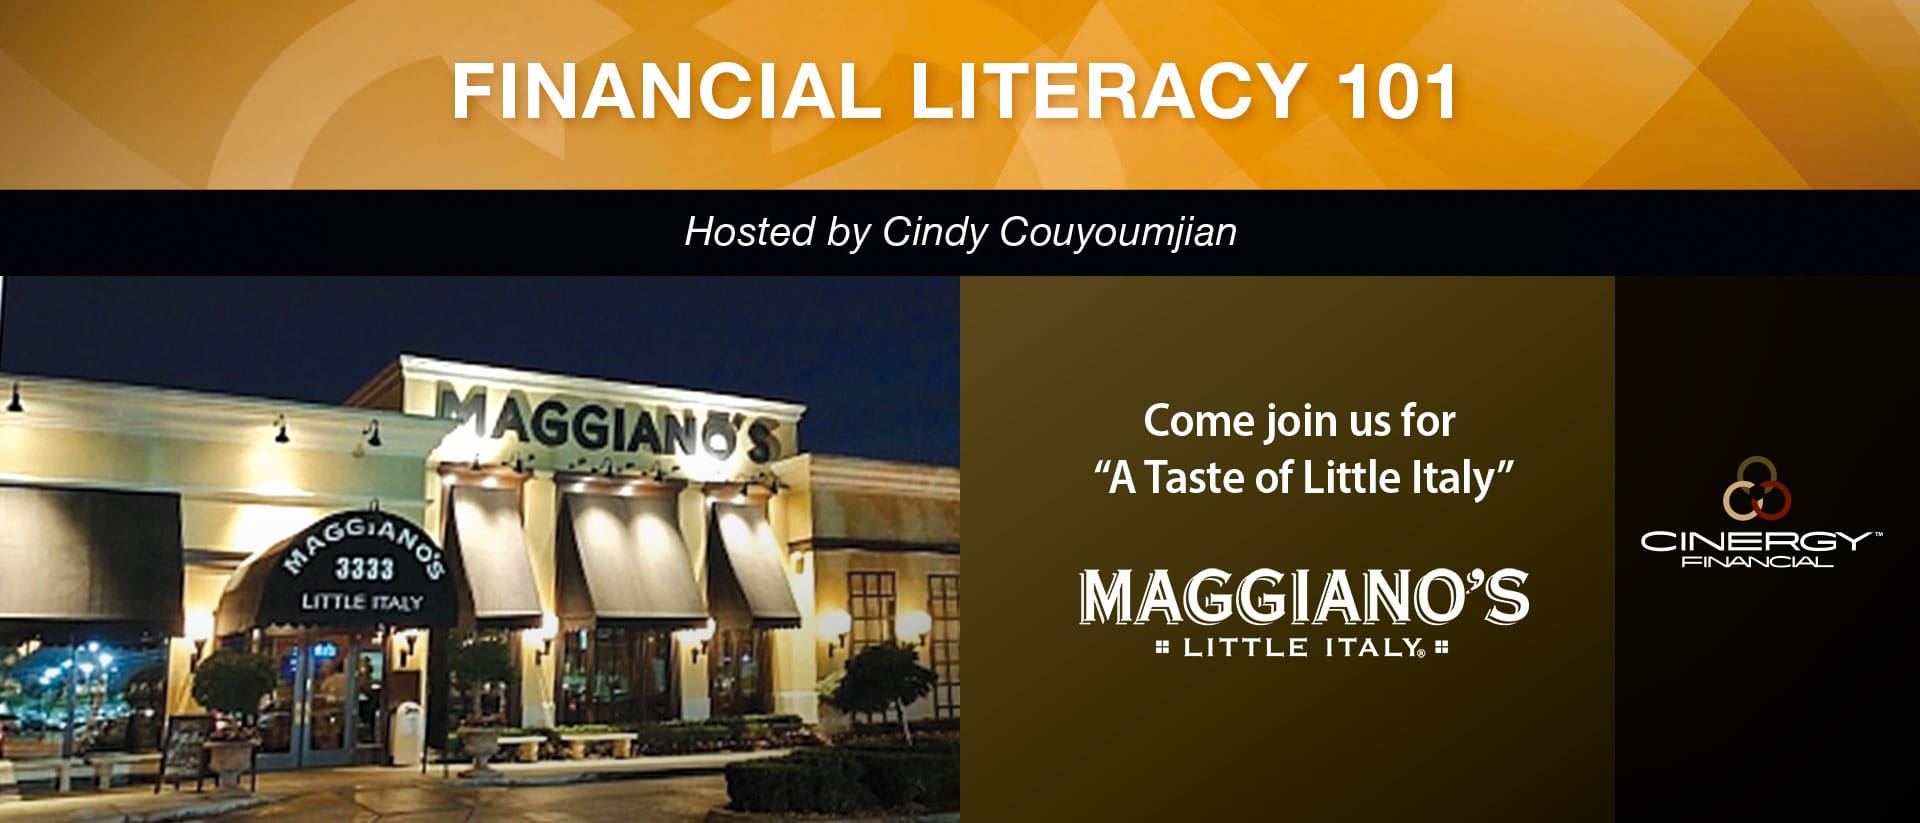 Event cinergy financial literacy 101 Maggianos